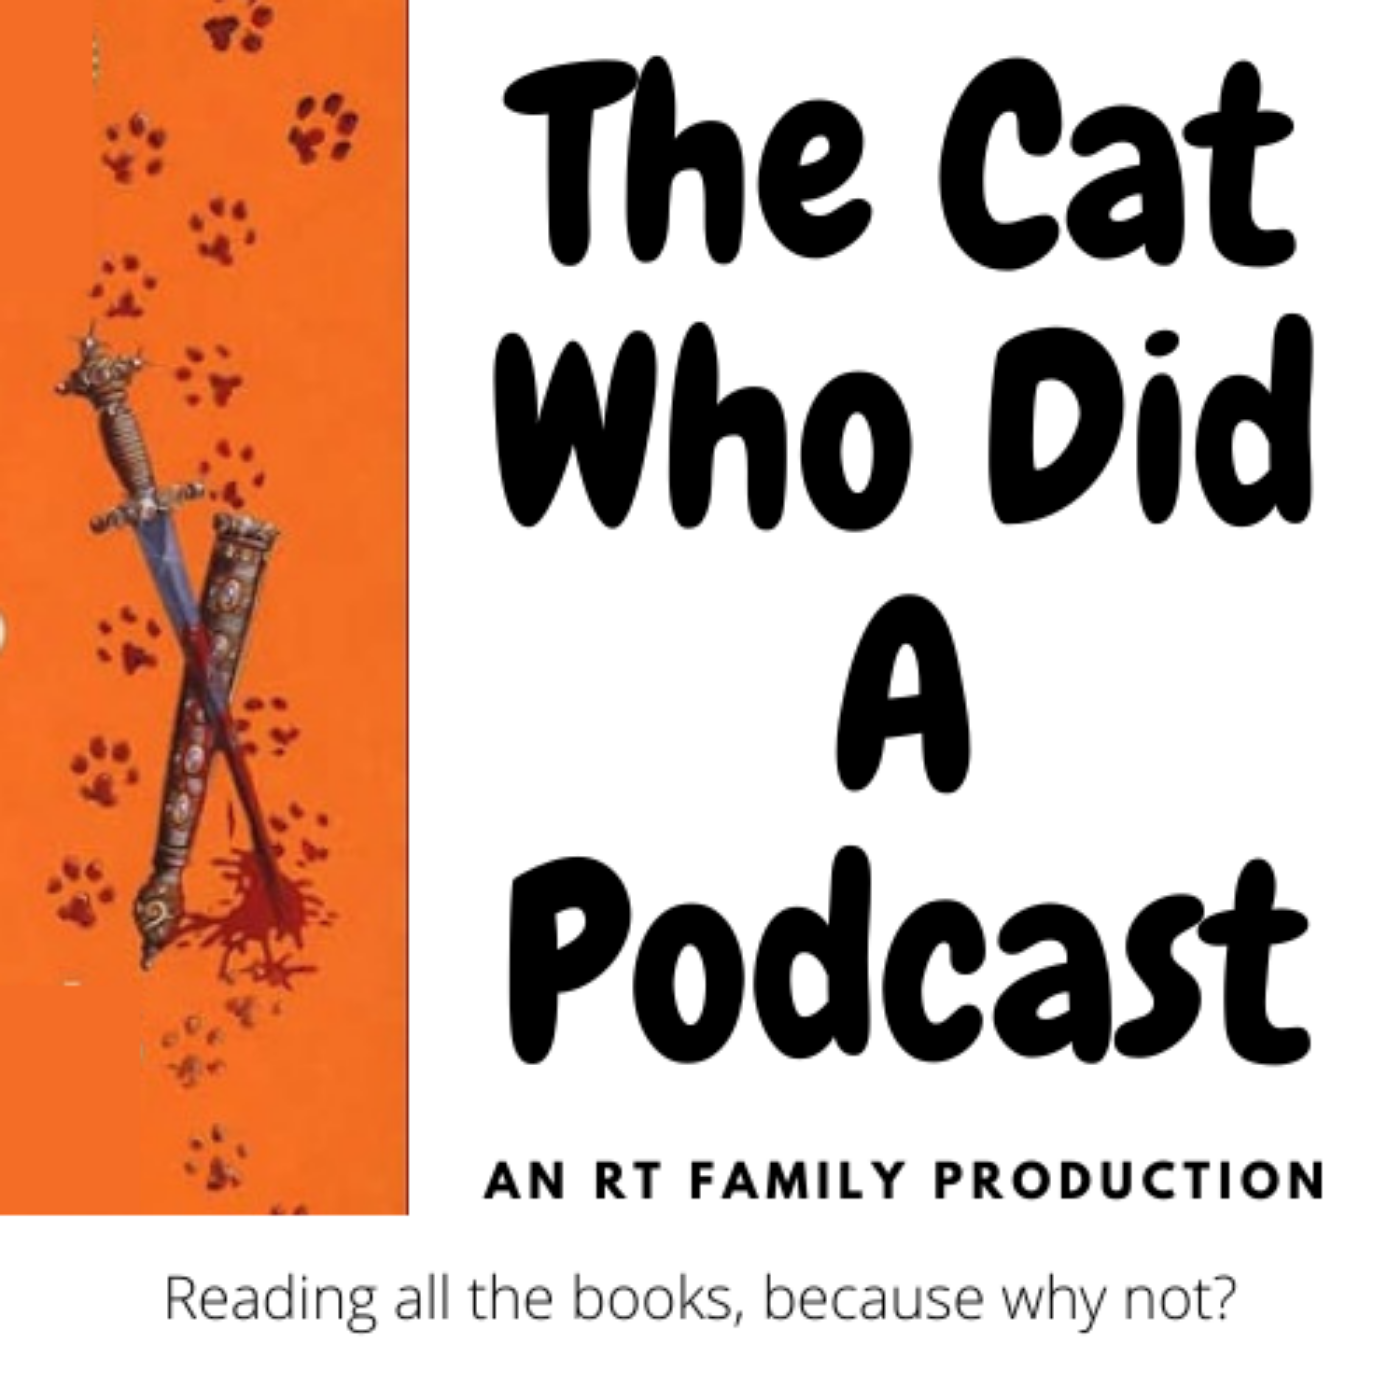 The Cat Who Did a Podcast